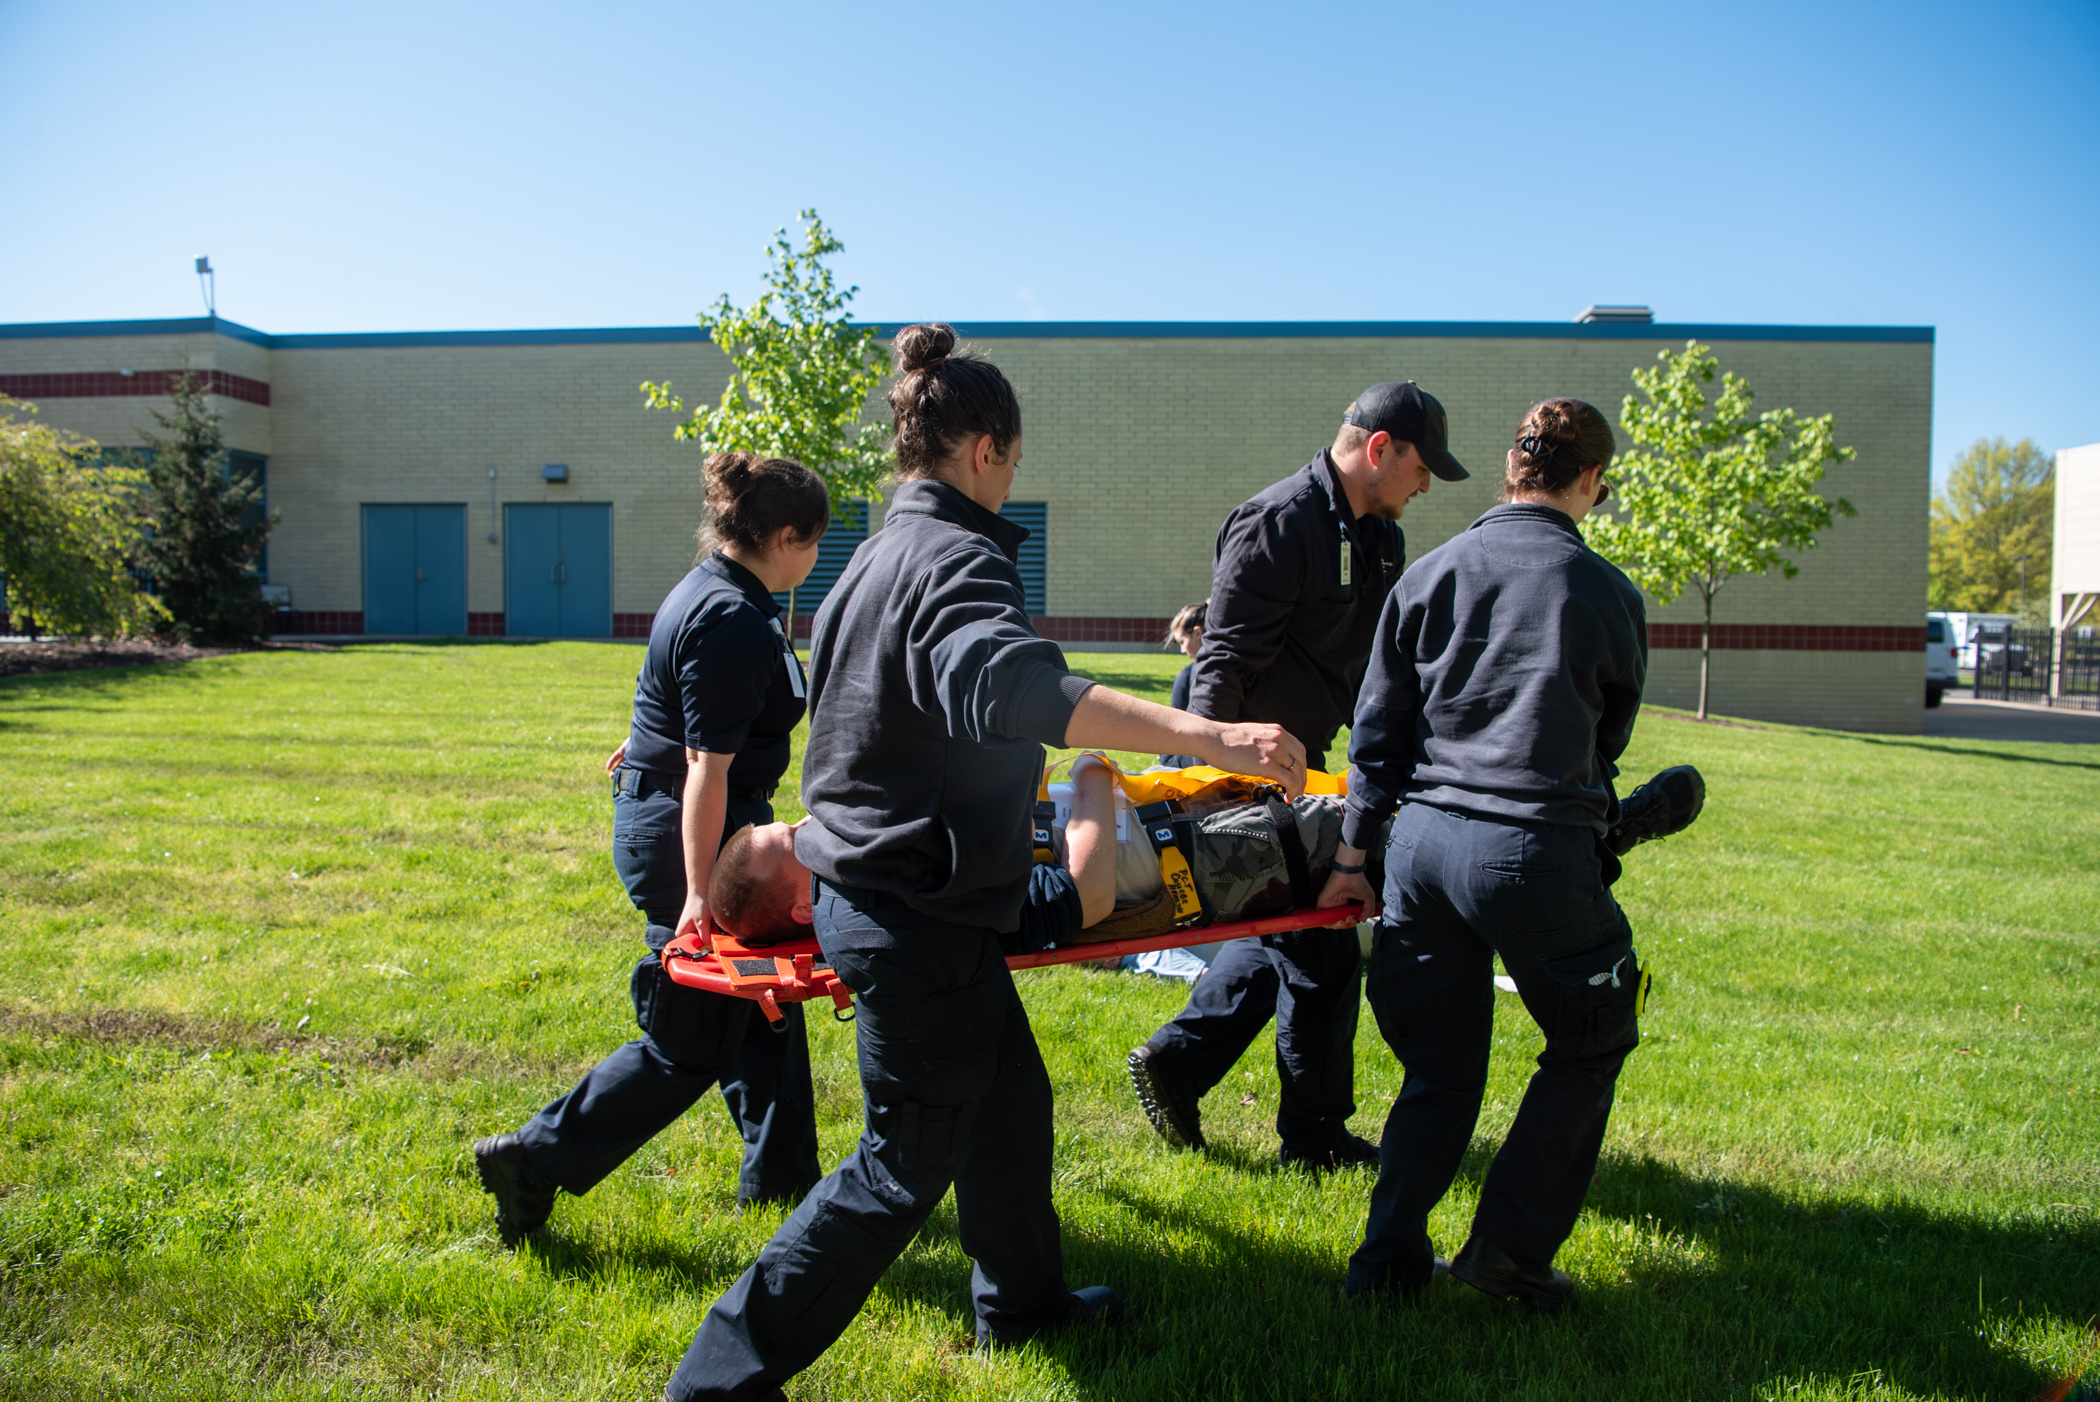 Mock disaster provides realistic rehearsal for coordinated response